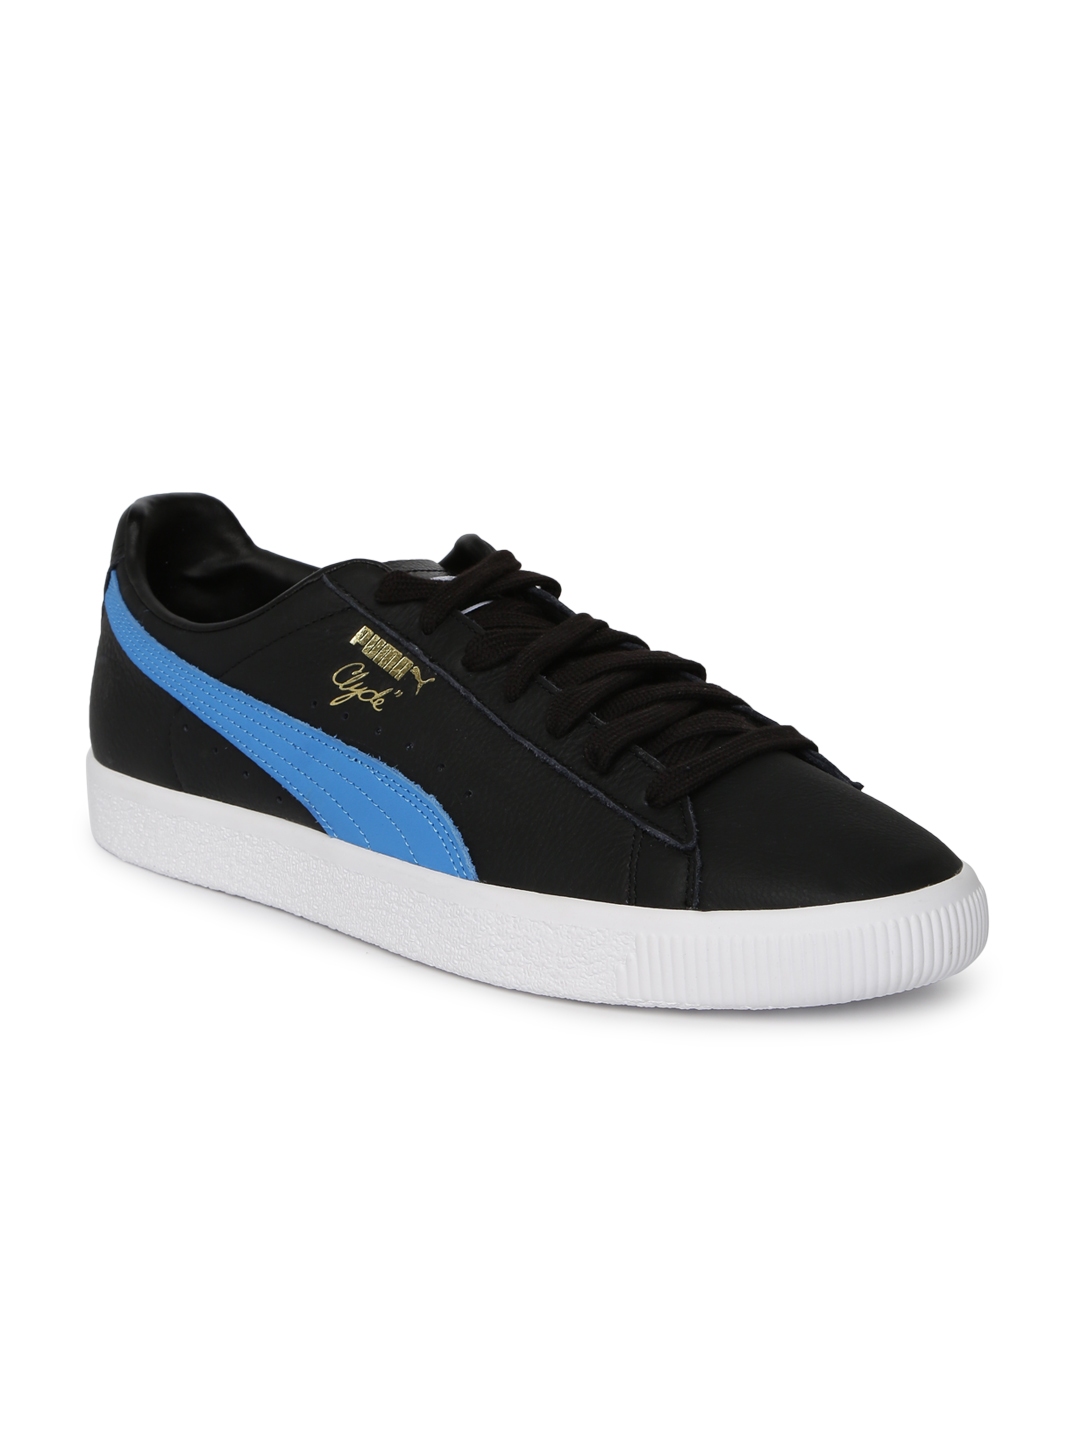 Buy Puma Unisex Clyde Core Black Leather Sneakers - Casual Shoes for ...